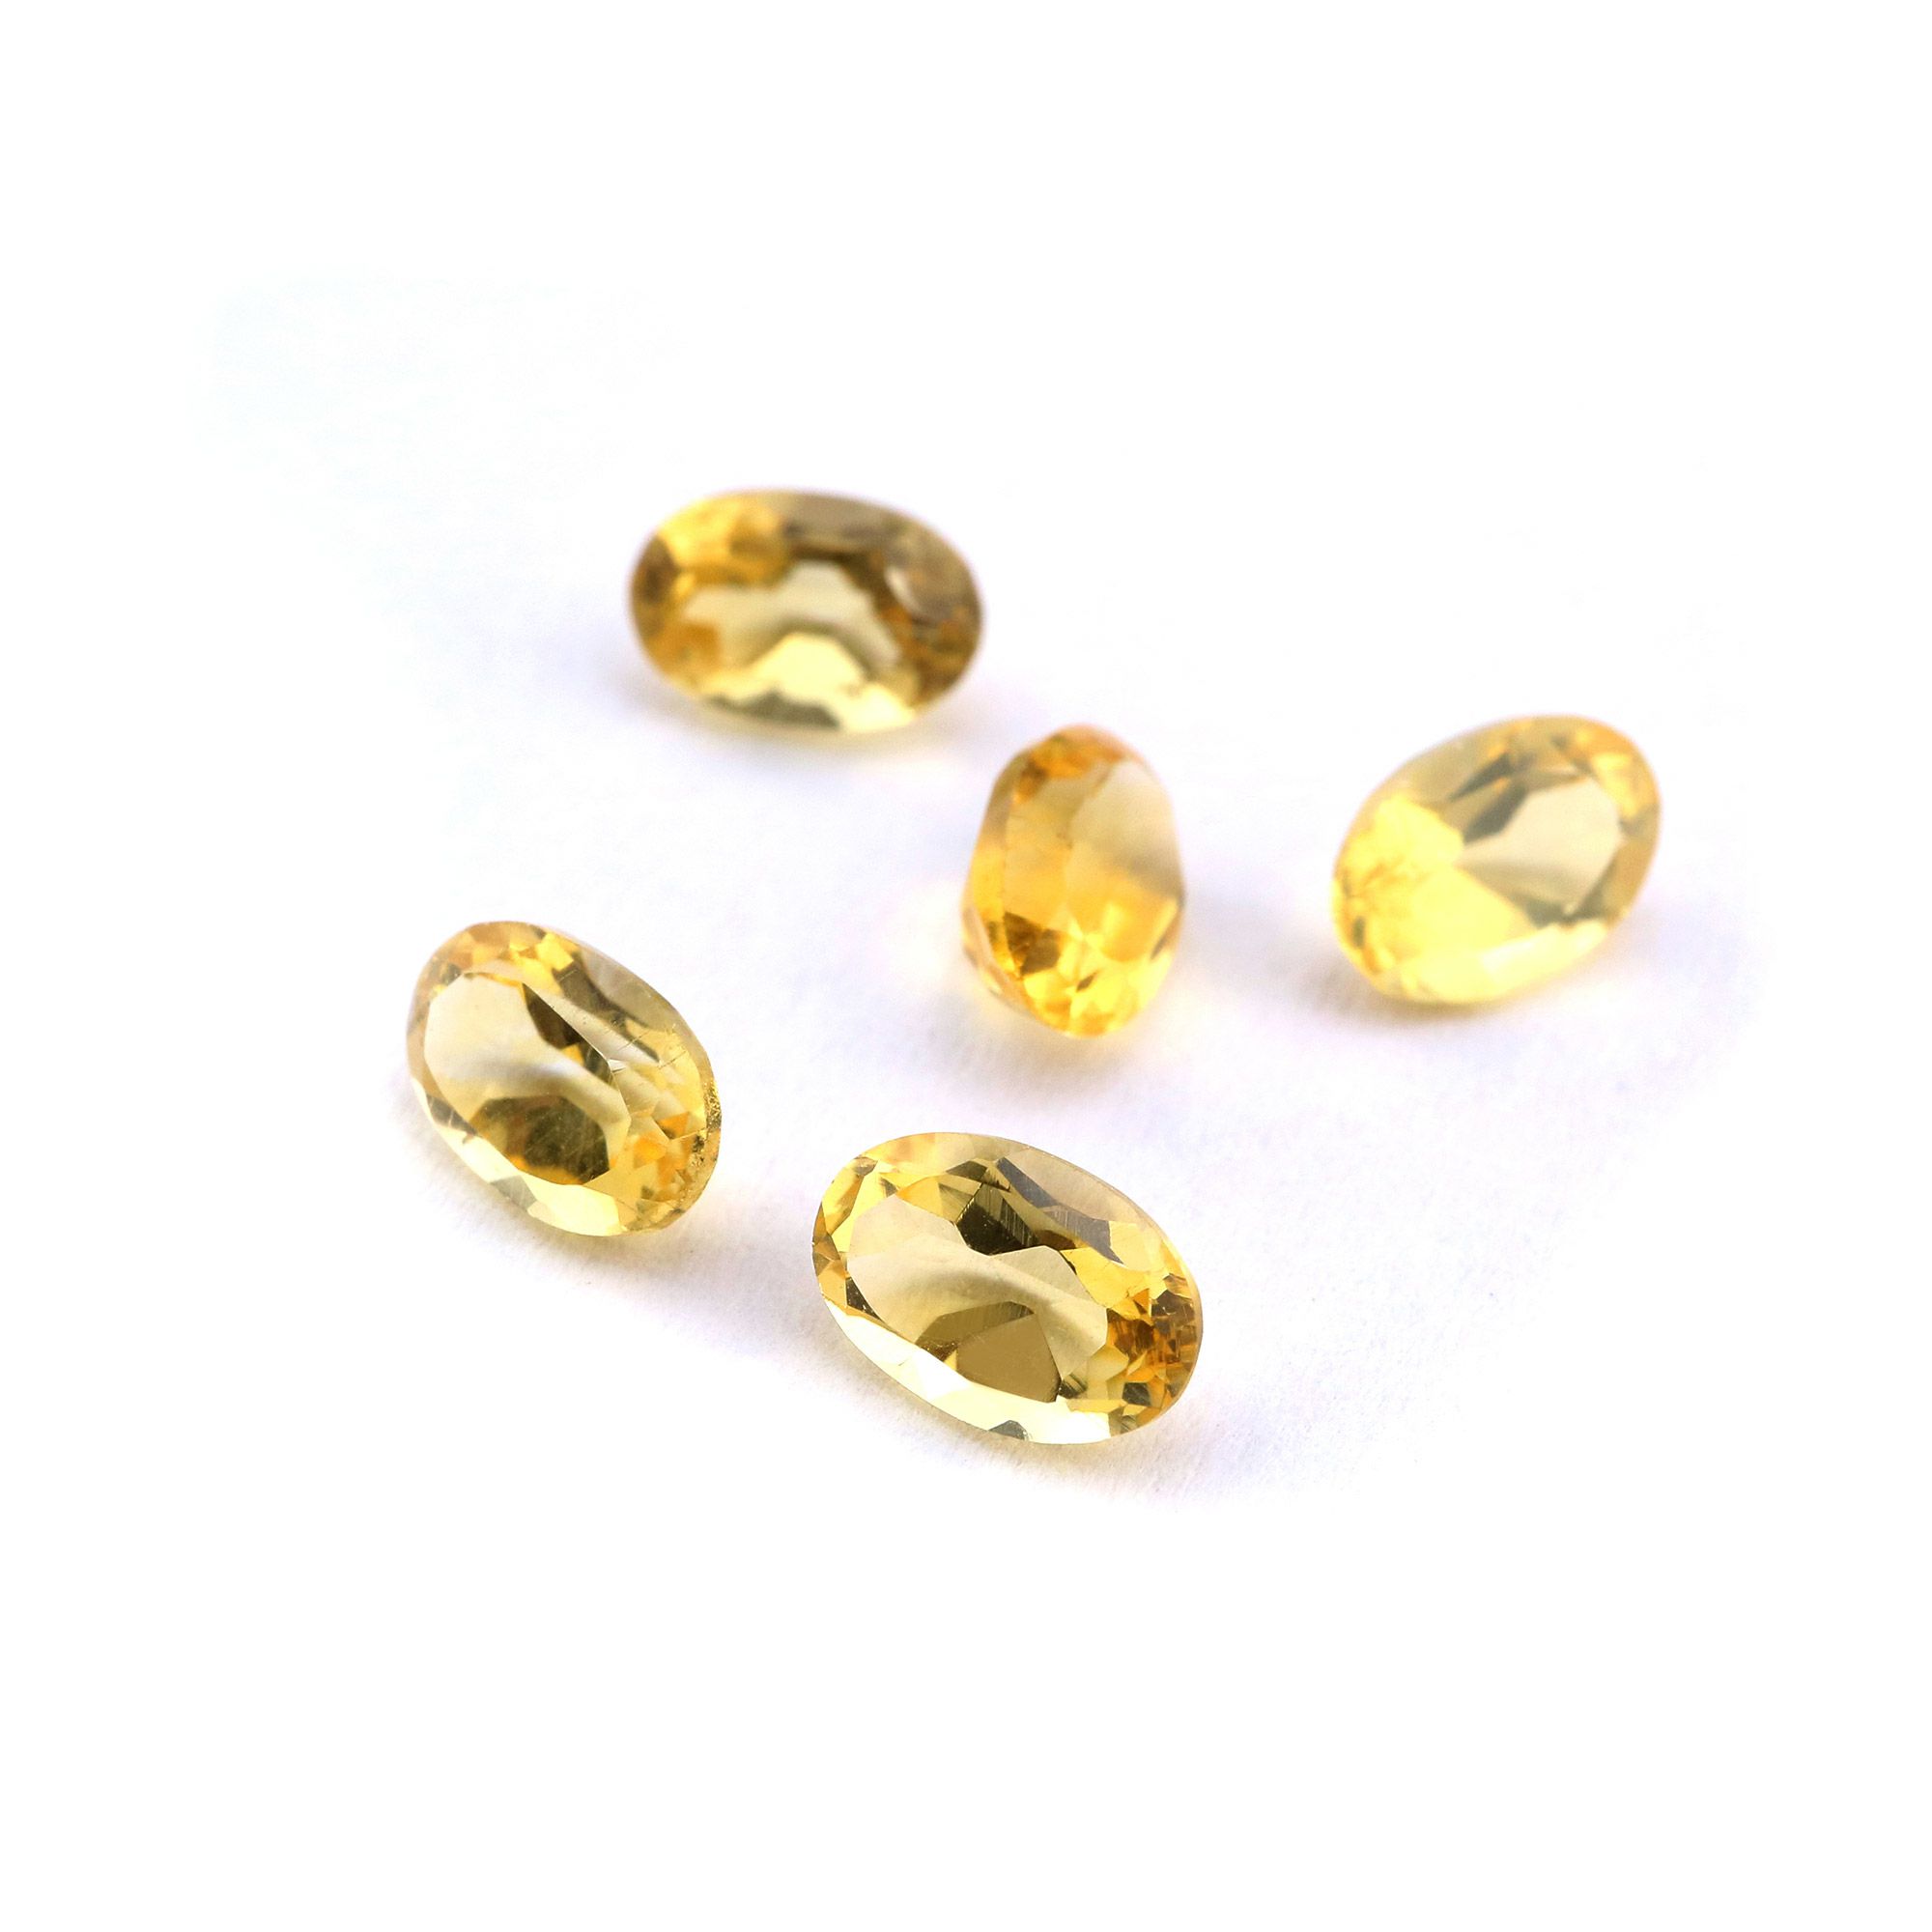 5Pcs Oval Yellow Citrine November Birthstone Faceted Cut Loose Gemstone Natural Semi Precious Stone DIY Jewelry Supplies 4120121 - Click Image to Close